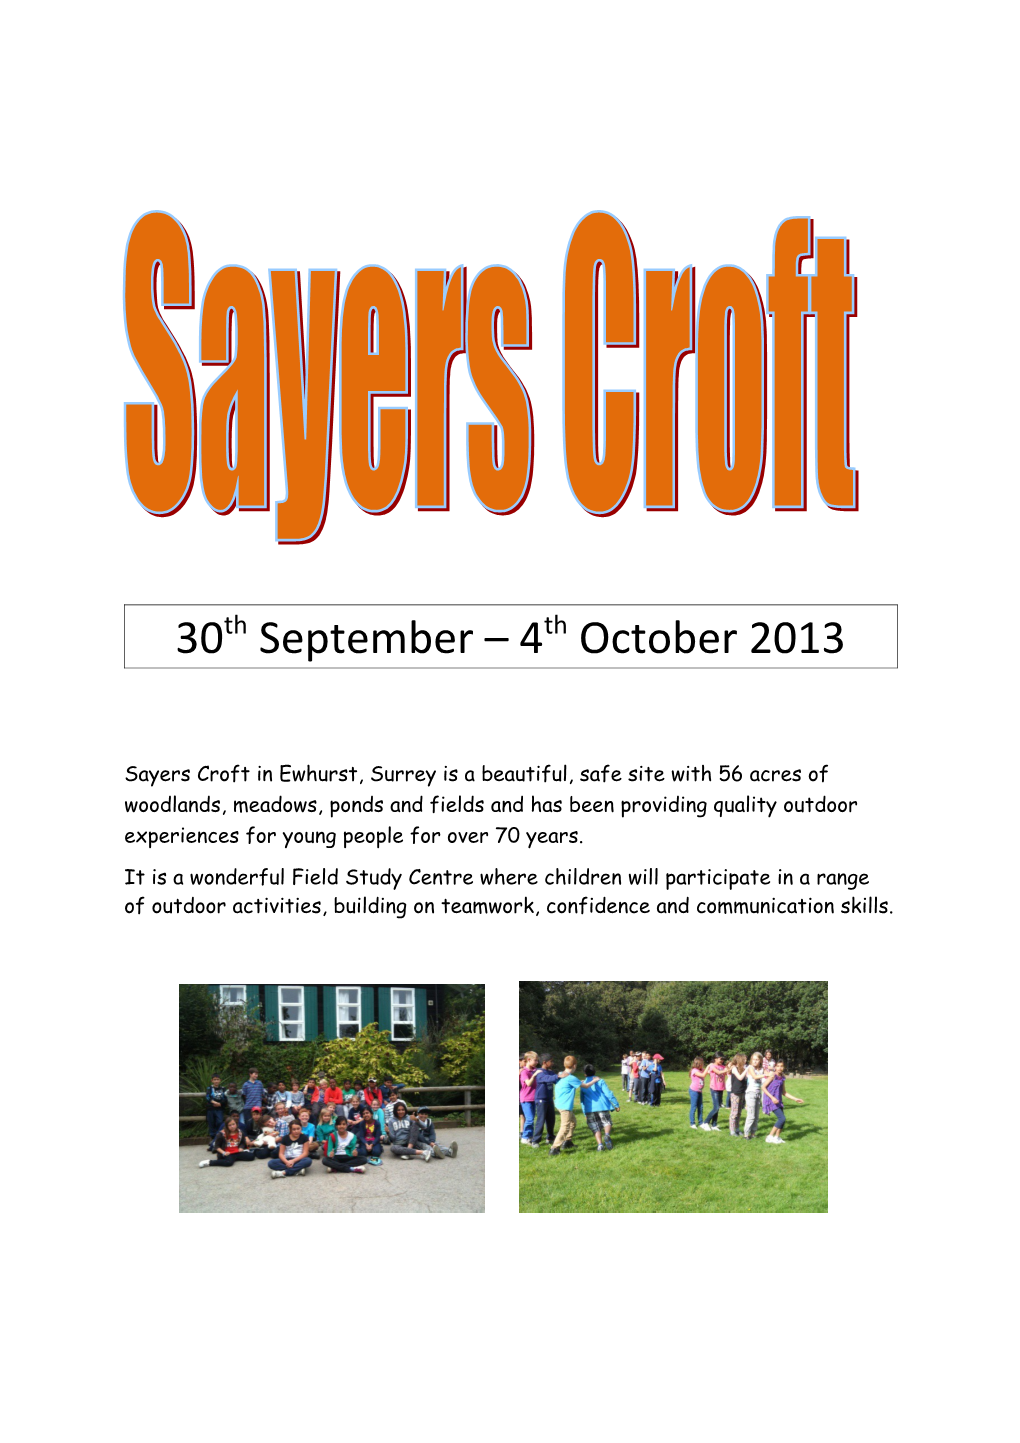 Sayers Croft in Ewhurst, Surrey Is a Beautiful, Safe Site with 56 Acres of Woodlands, Meadows